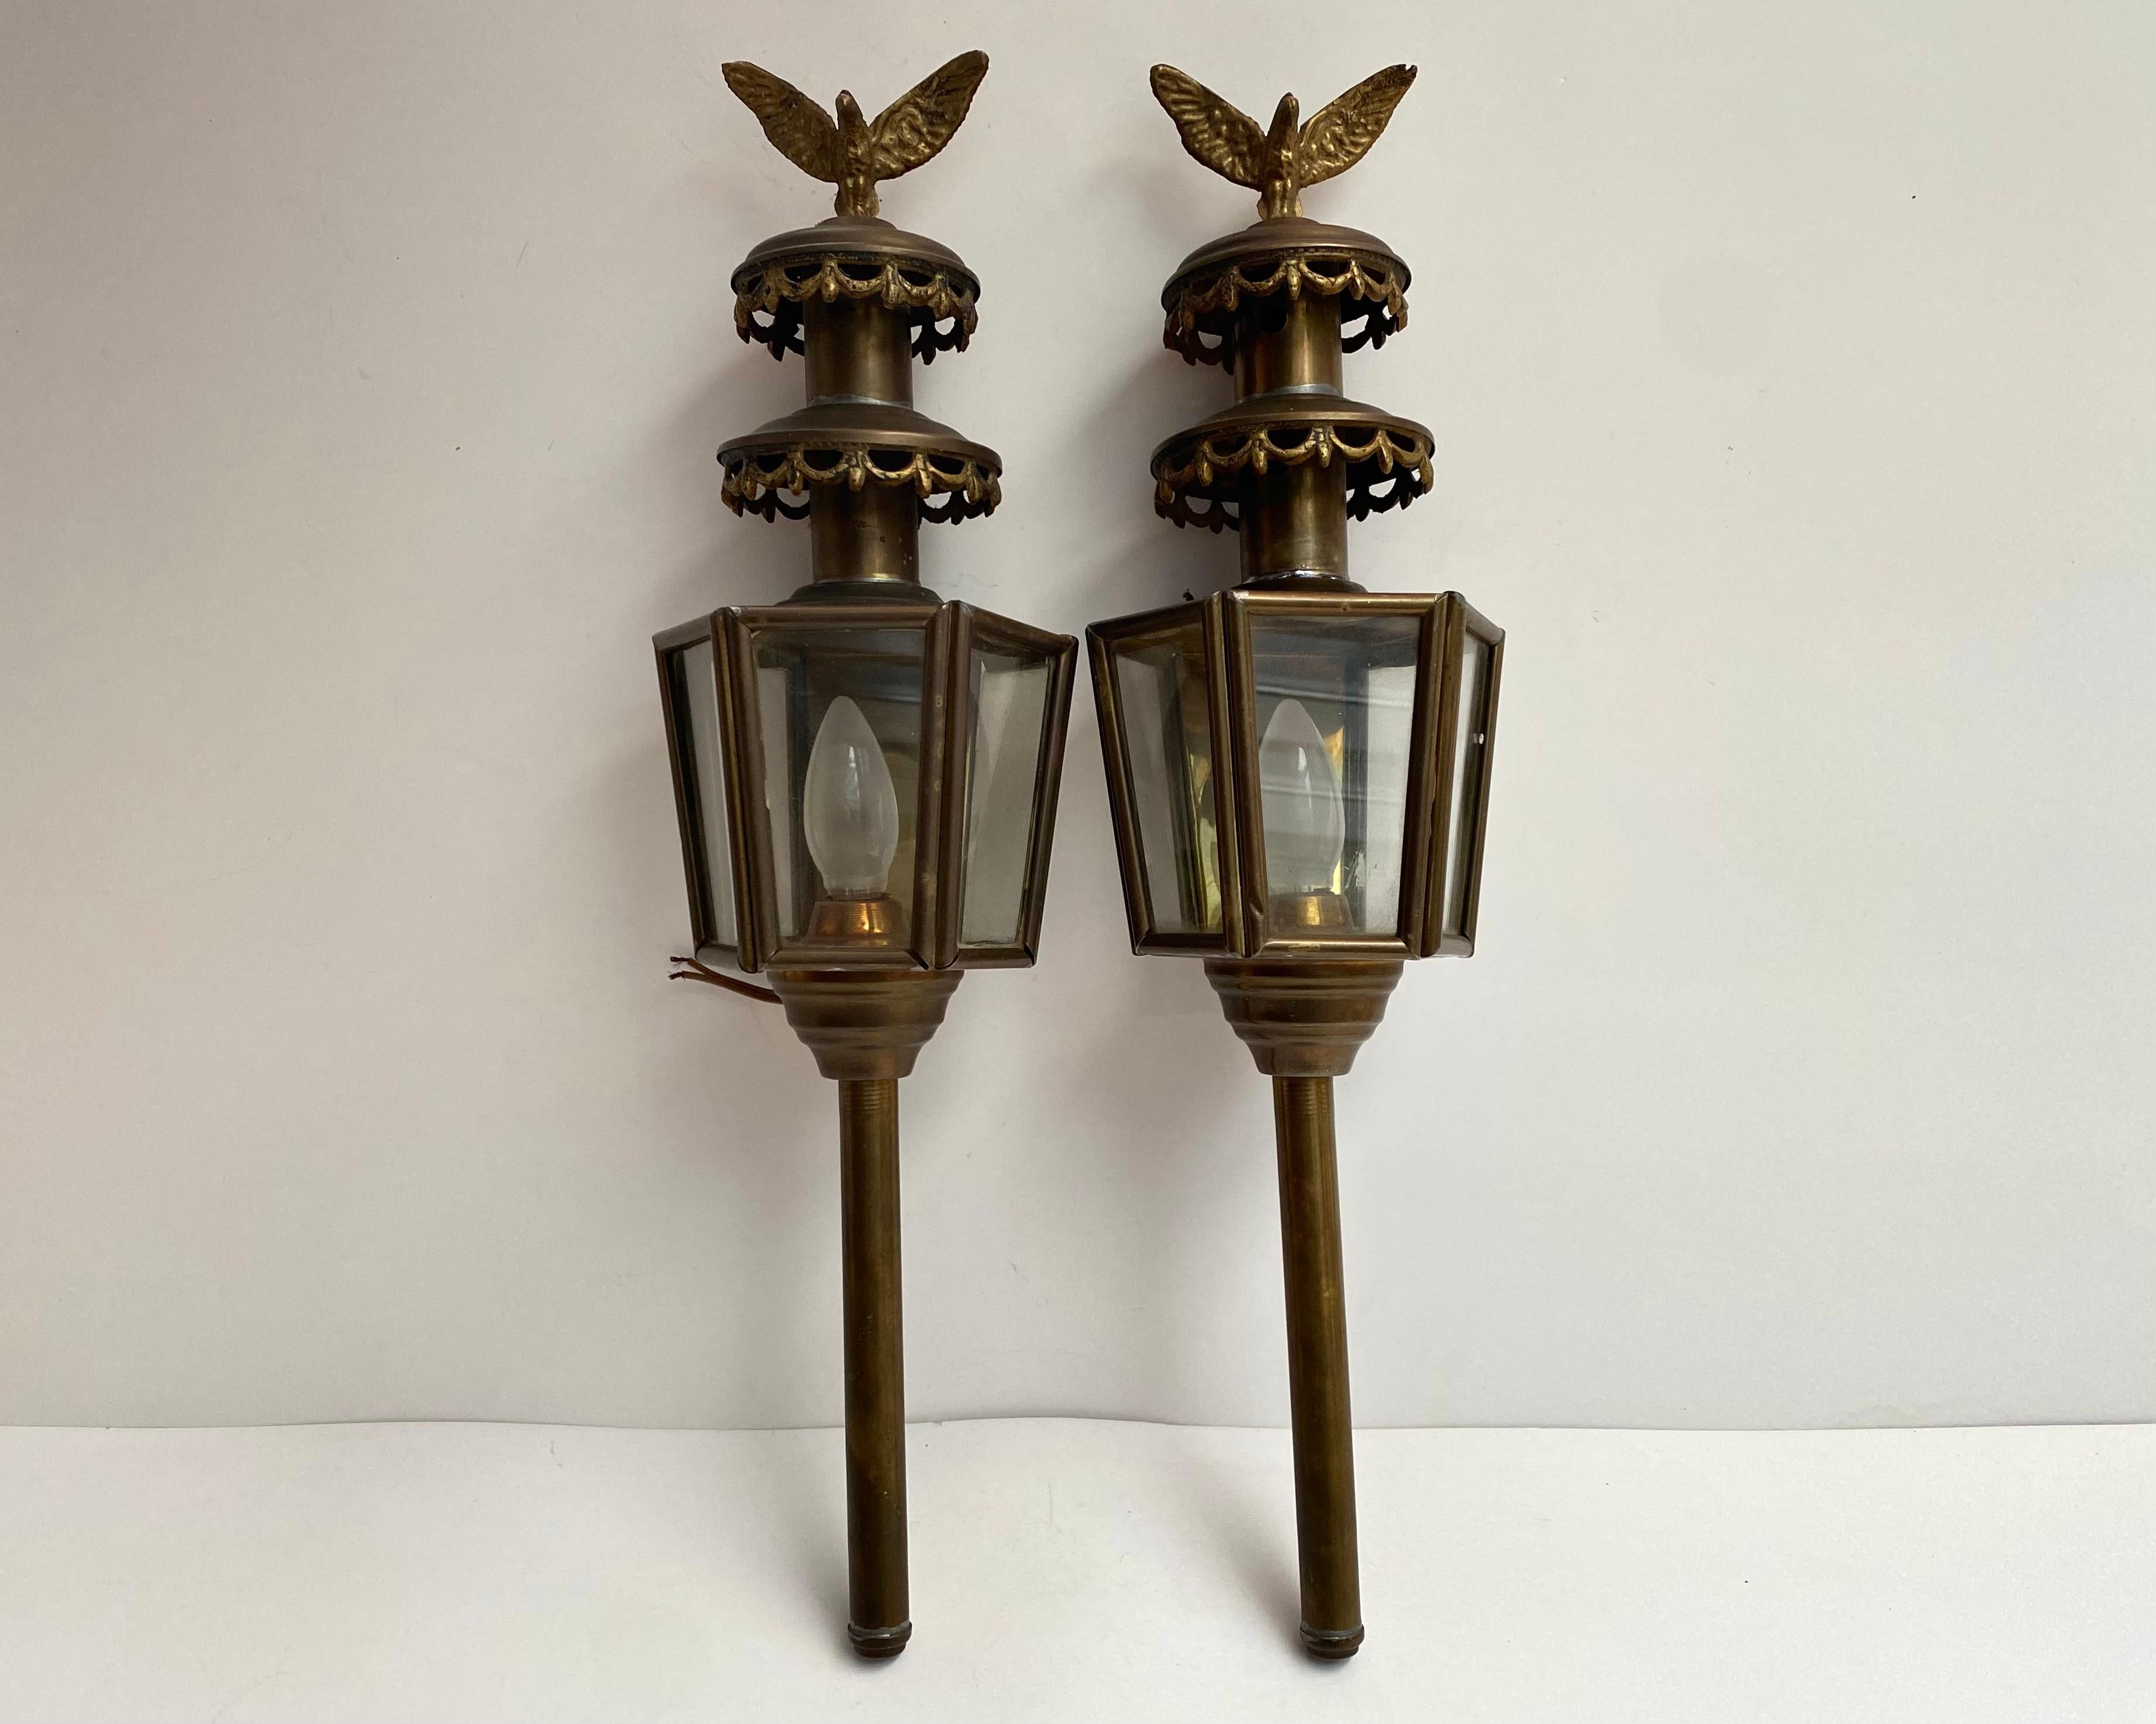 Pair of Antique brass carriage lanterns, manufactured in France, second half of the 19 century.  

The huge carriage lamps are adorned with decorative crowns and an imposing eagle at the top.

Original glass surrounds the lamp on five